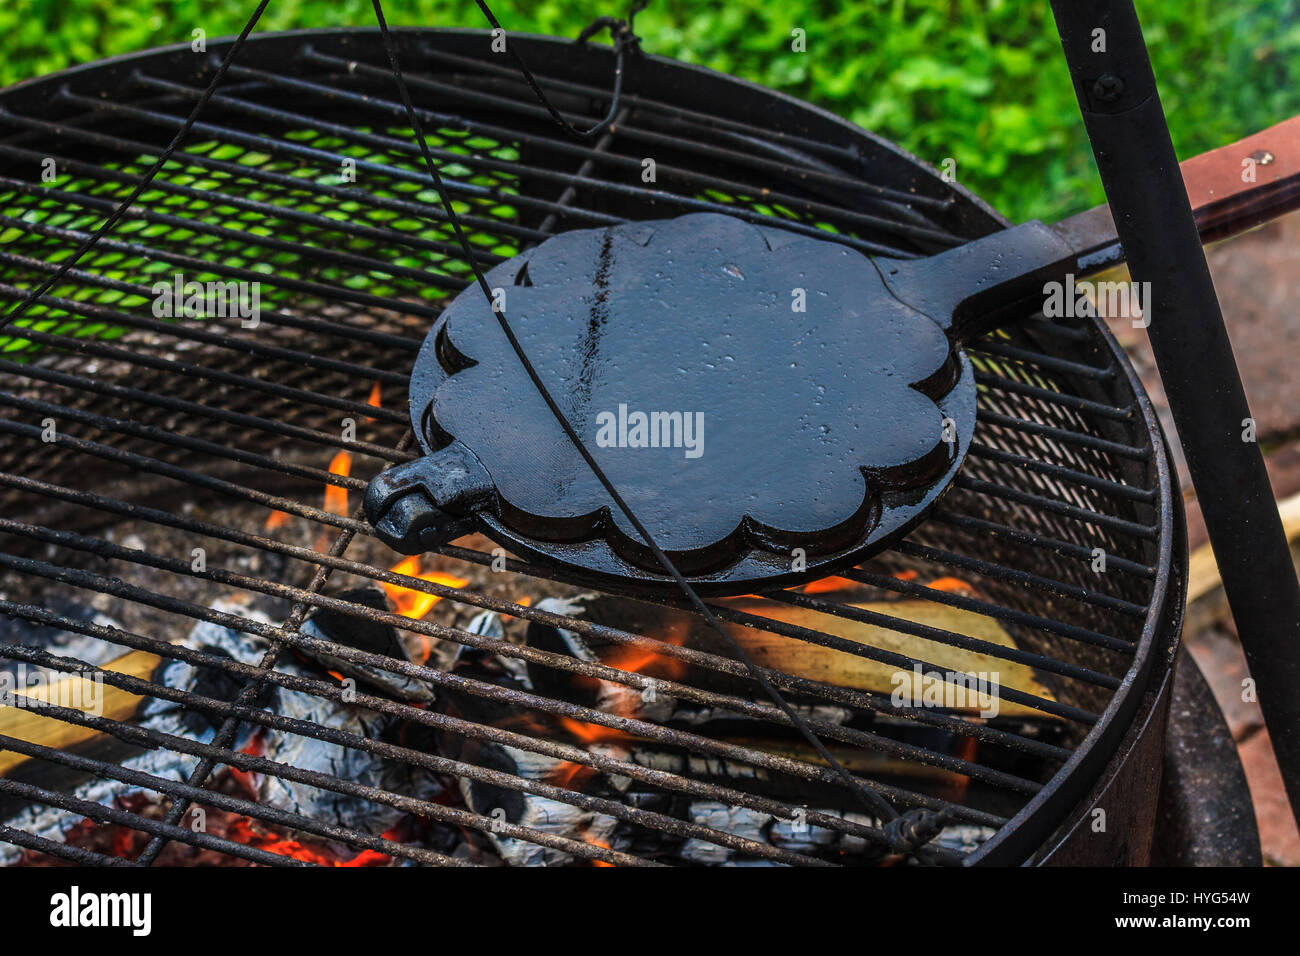 Old cast-iron waffle iron, baking waffles on open flame grill outdoors. Stock Photo